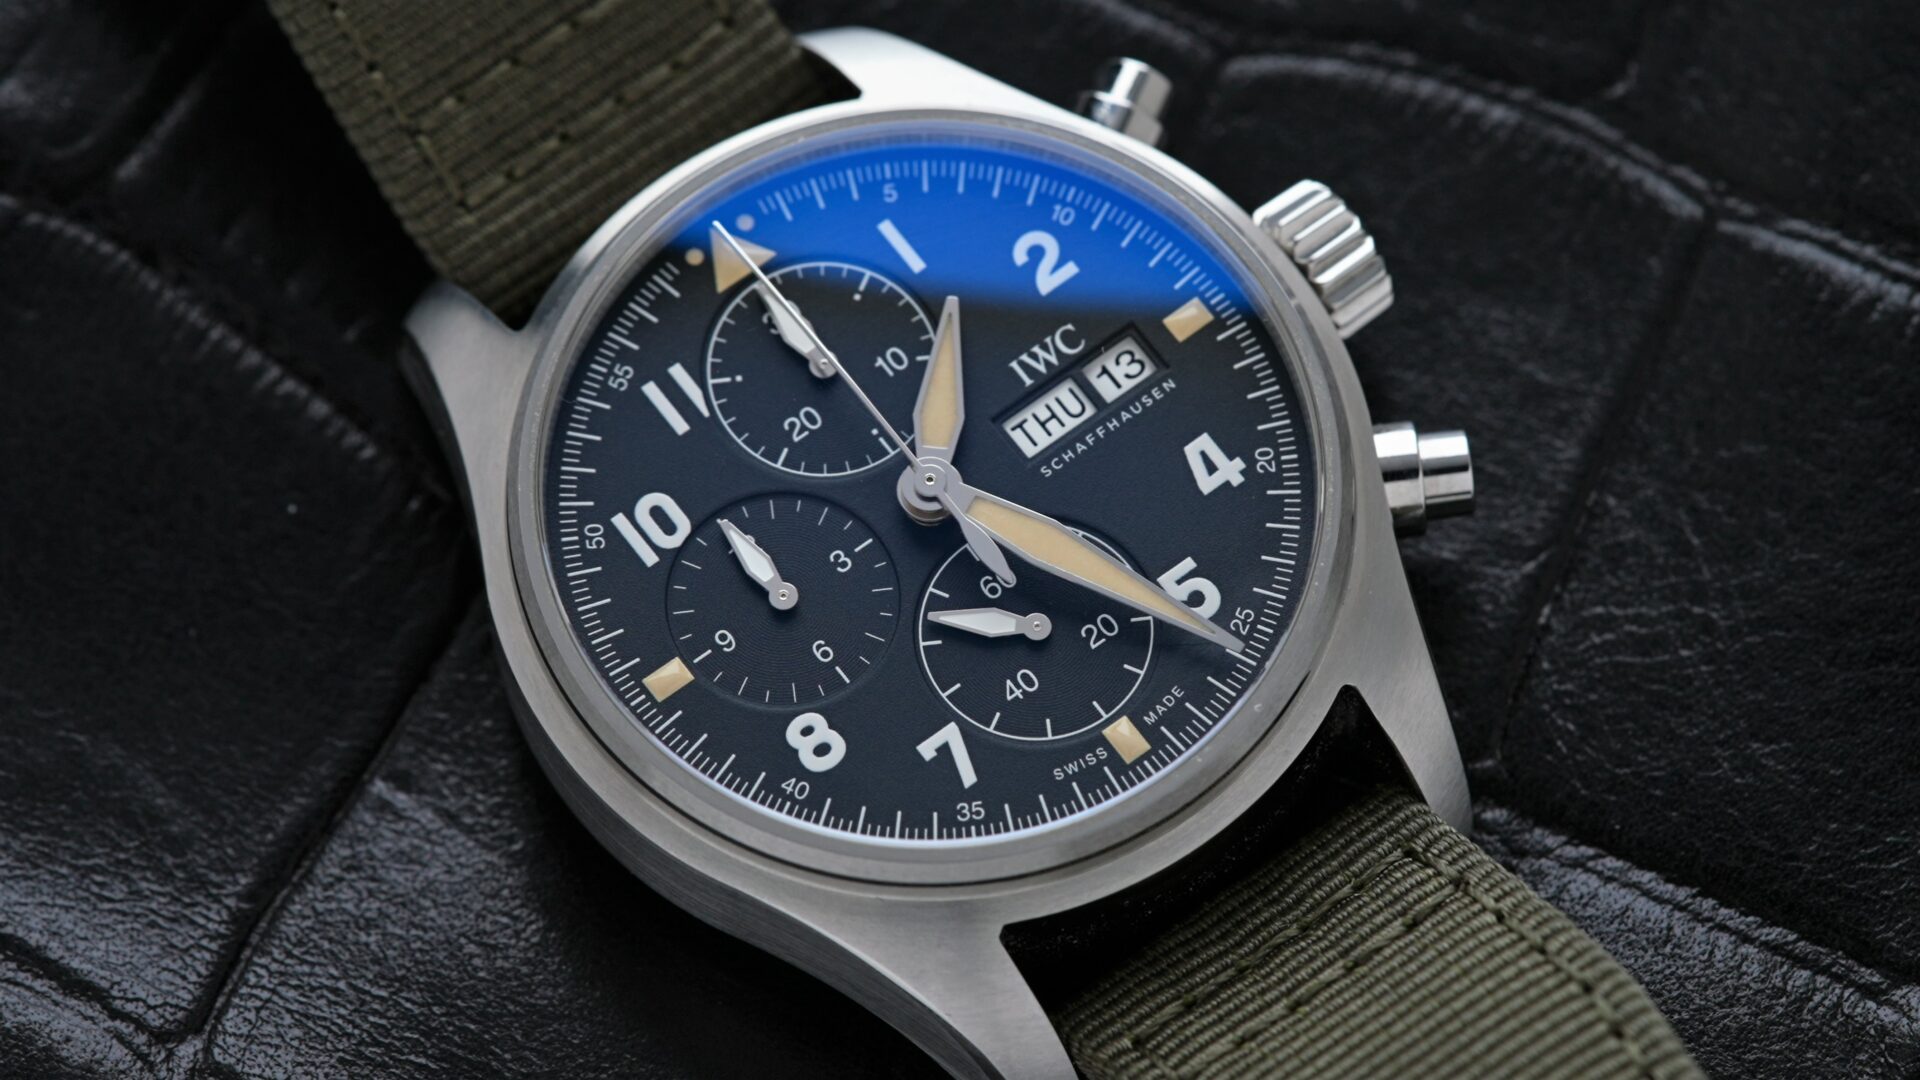 Close up shot of the dial on the IWC Pilot Spitfire Chronograph 41MM IW387901 wristwatch.